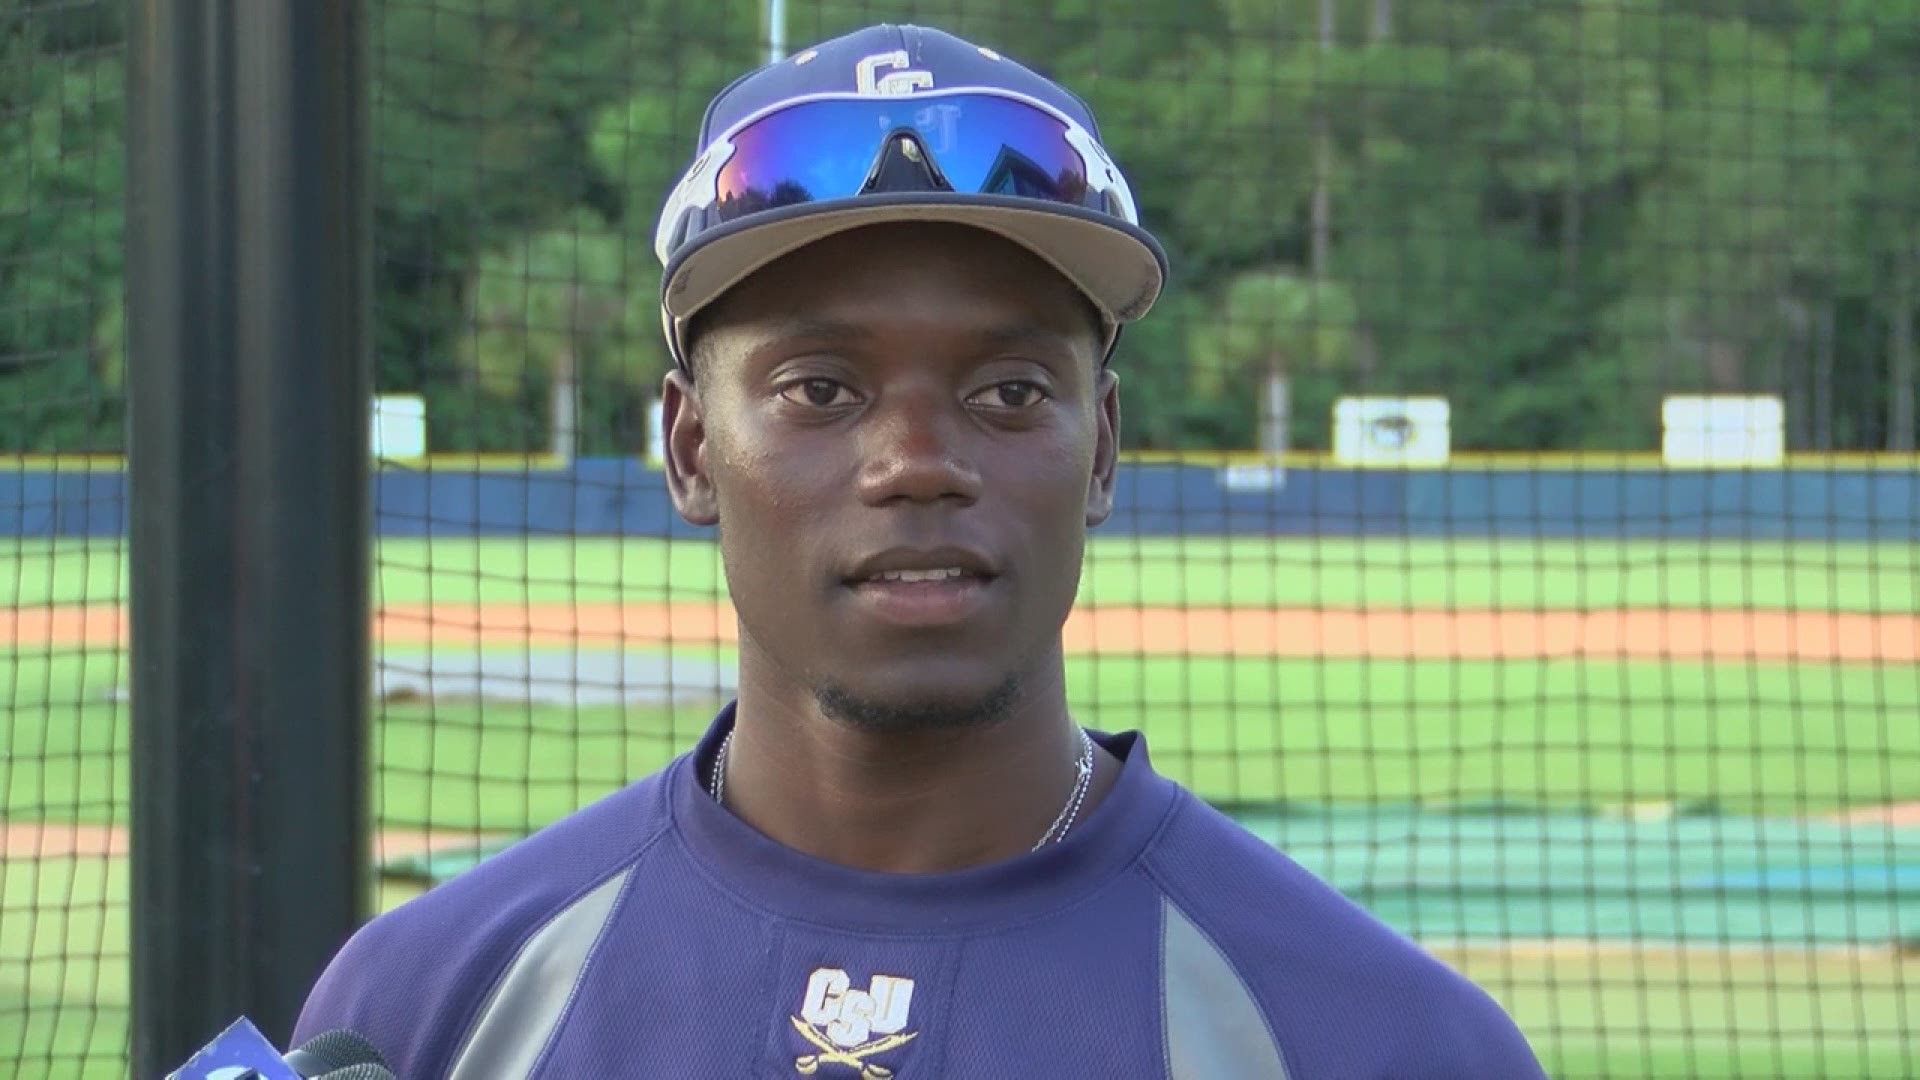 Charleston Southern junior outfielder Chris Singleton was taken in the 19th round by the Chicago Cubs. He talked about that moment and also what it means for his family.